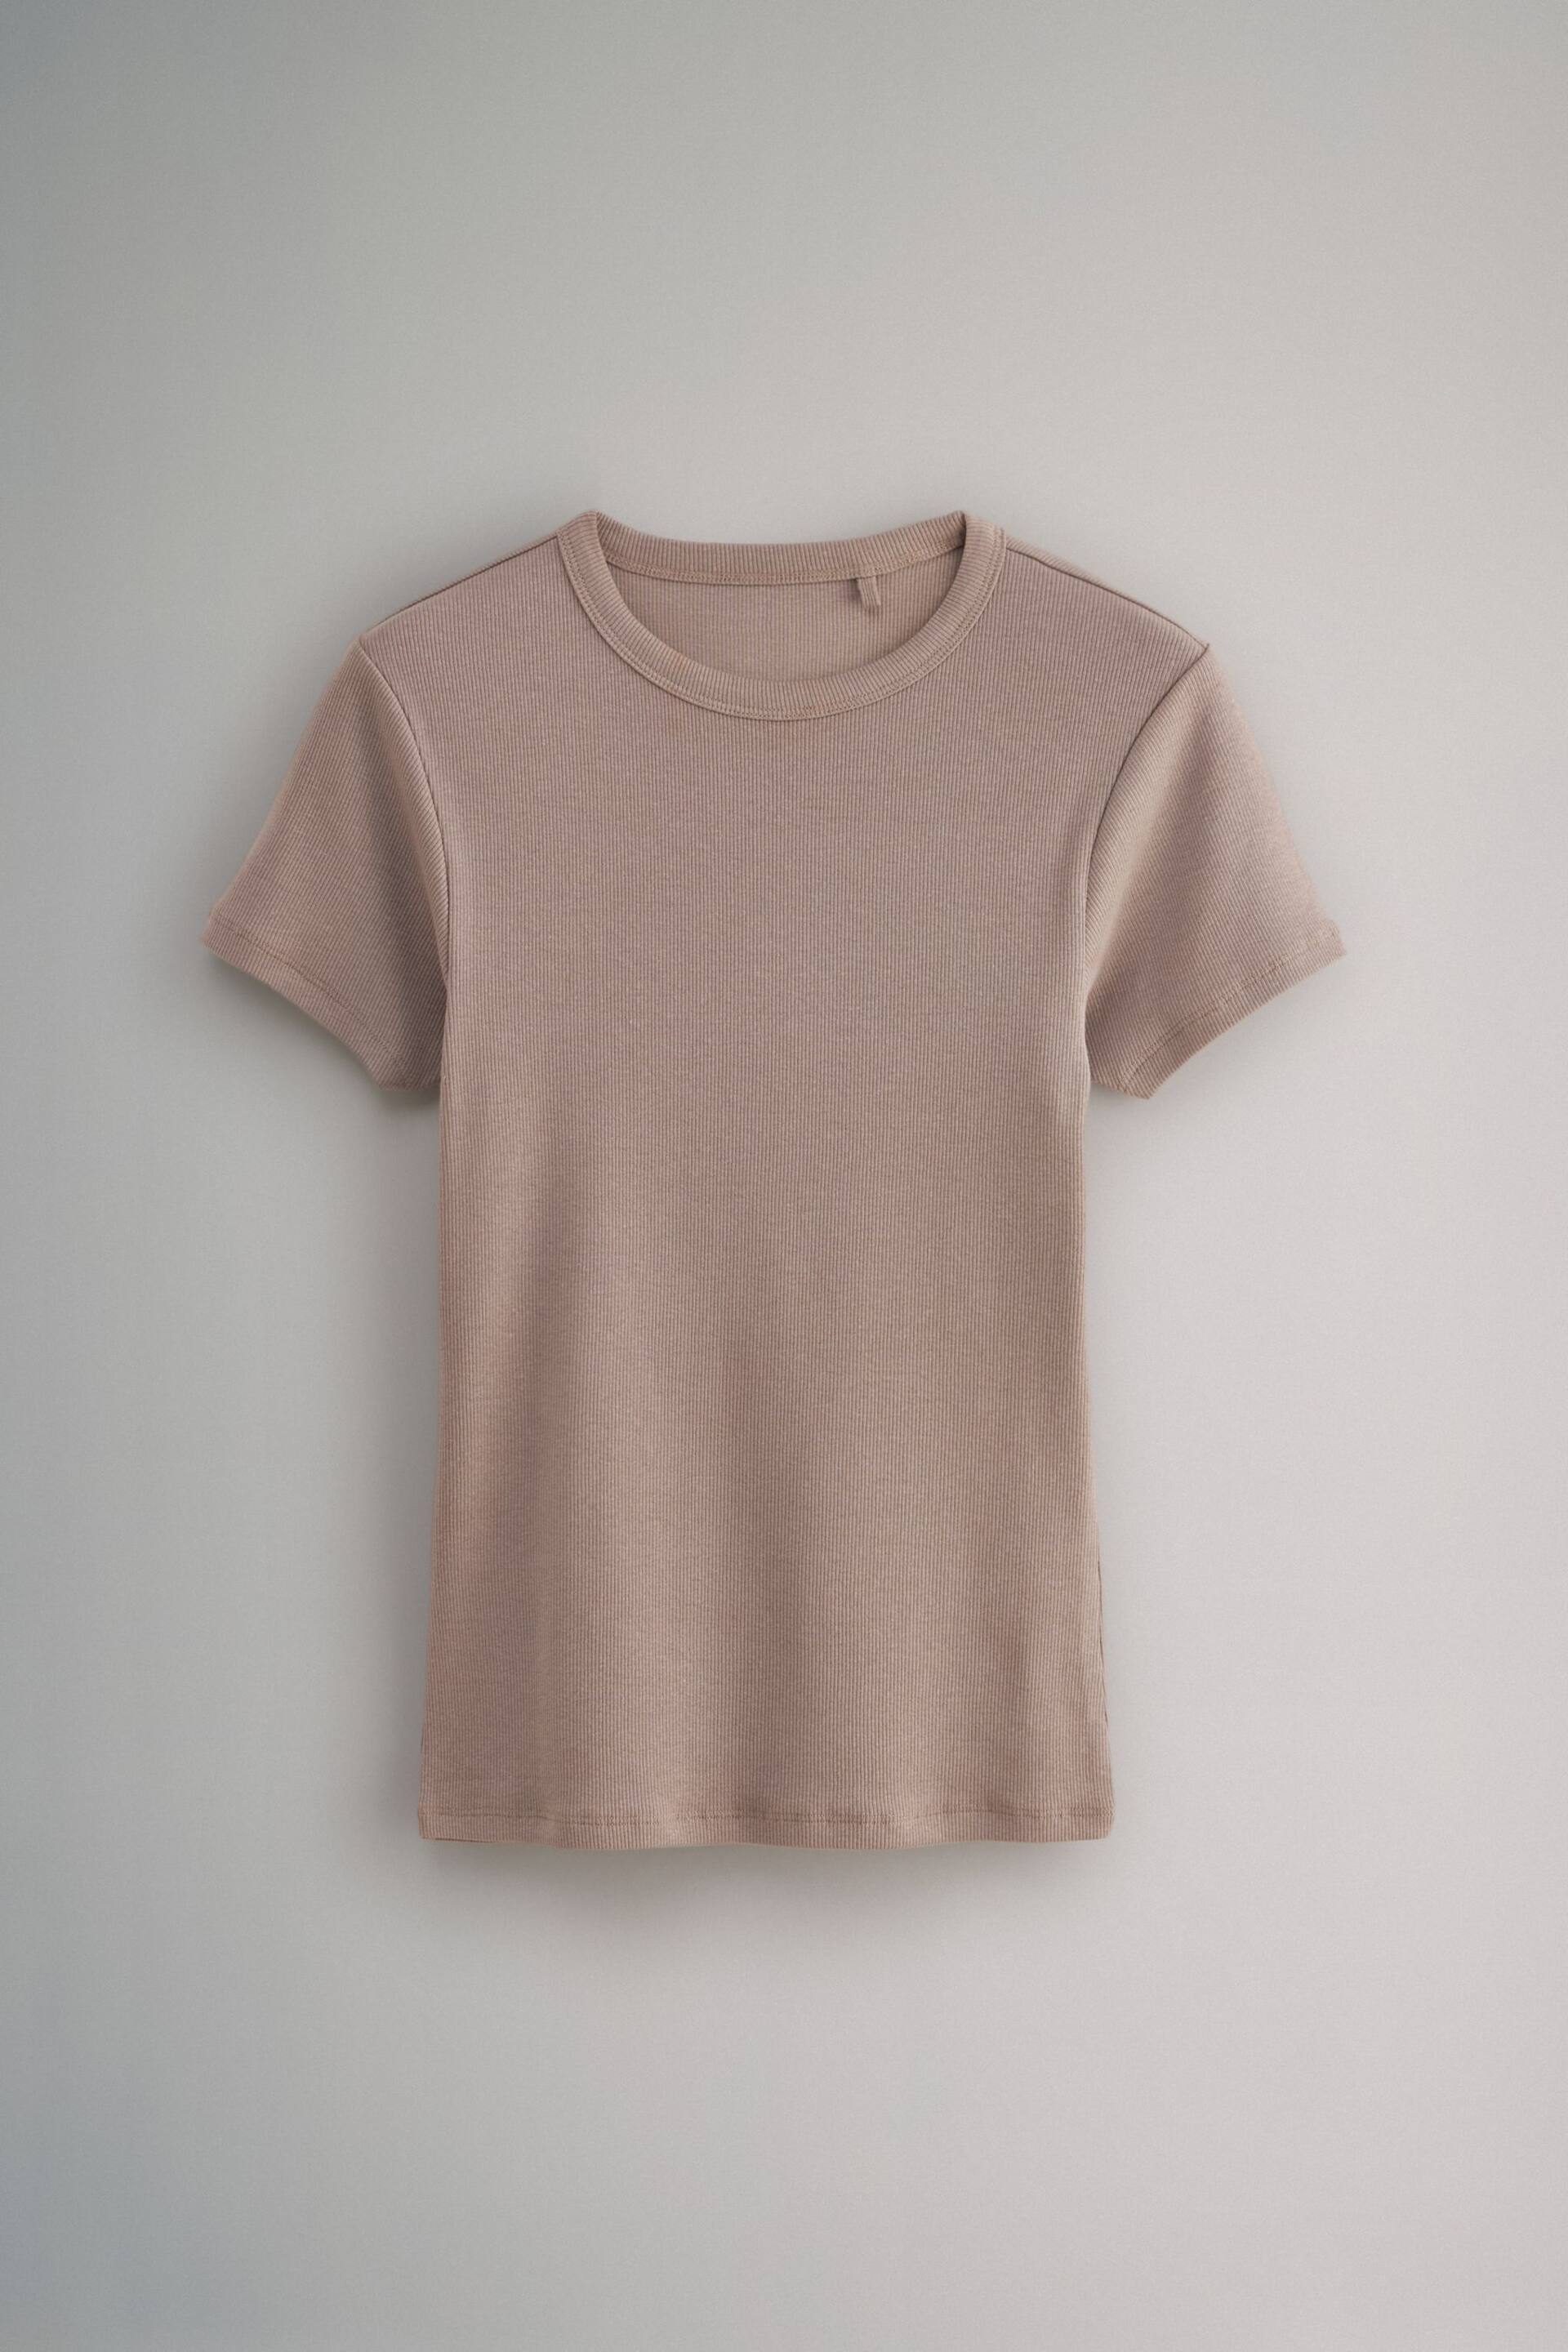 The Set Black/Taupe Brown/White 3 Pack Ribbed Short Sleeve T-Shirts - Image 7 of 8